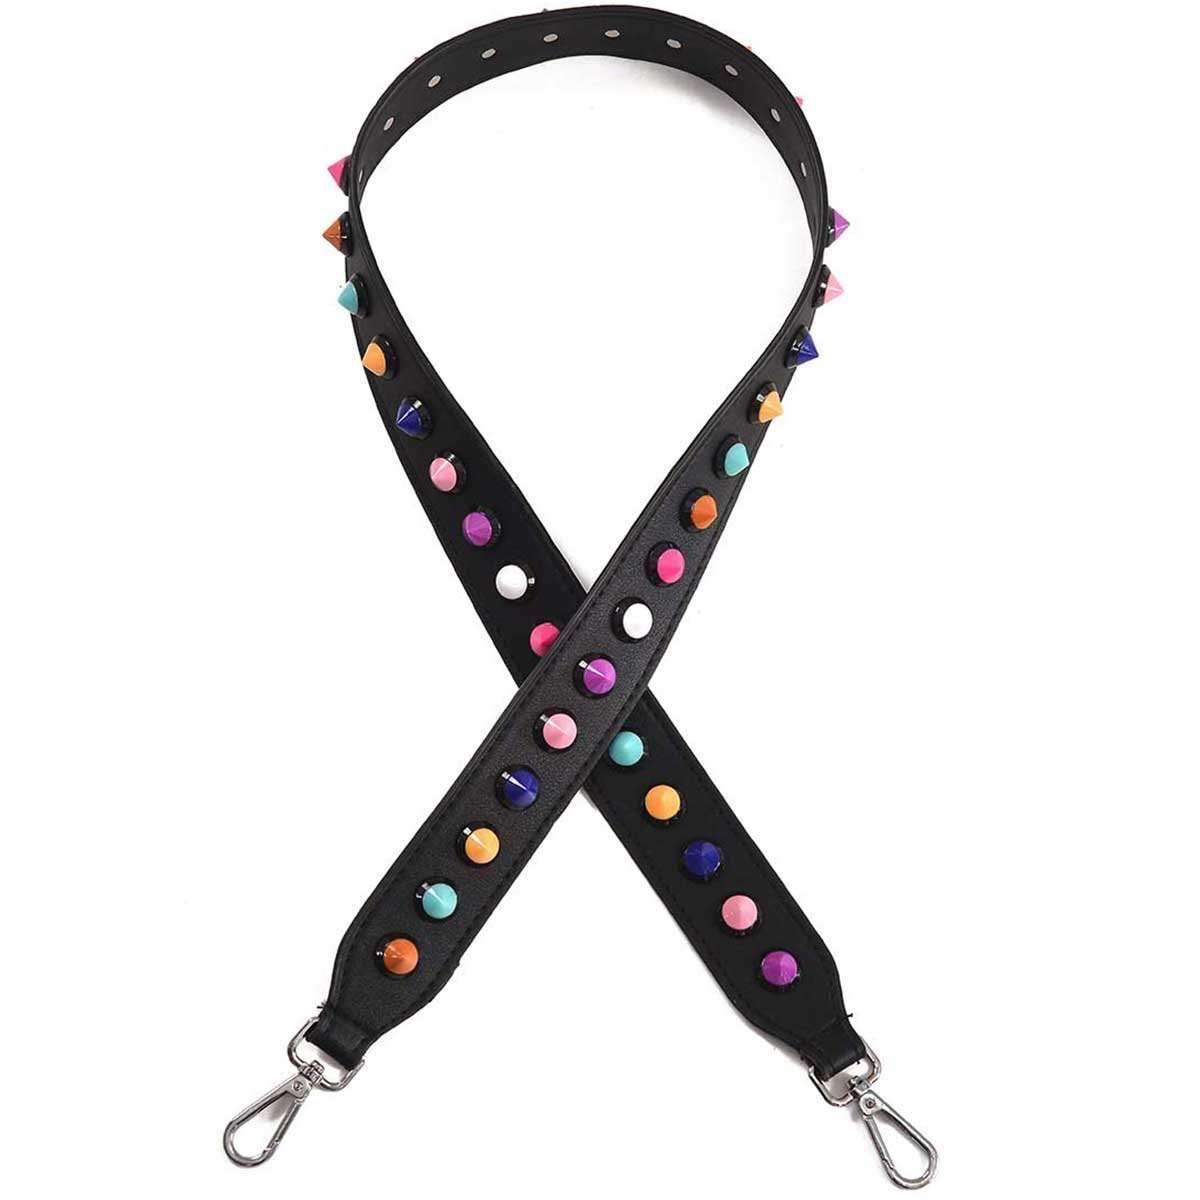 Guitar Handbag Strap,Other,Mad Style, by Mad Style